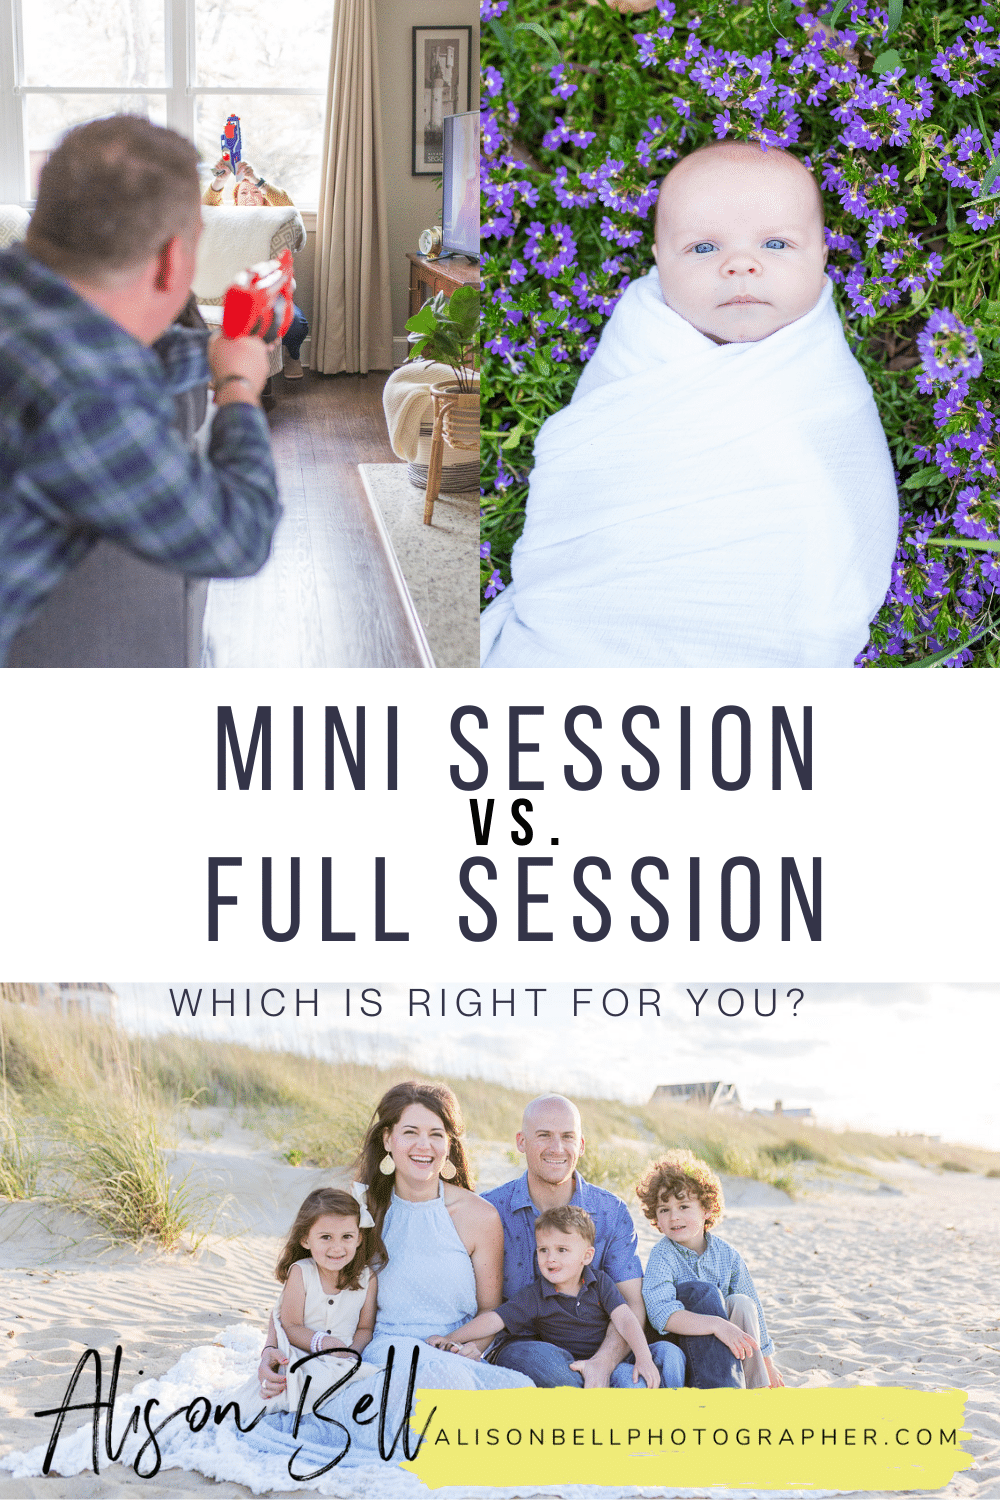 Mini sessions vs. full sessions - which is right for you? by alison bell, photographer